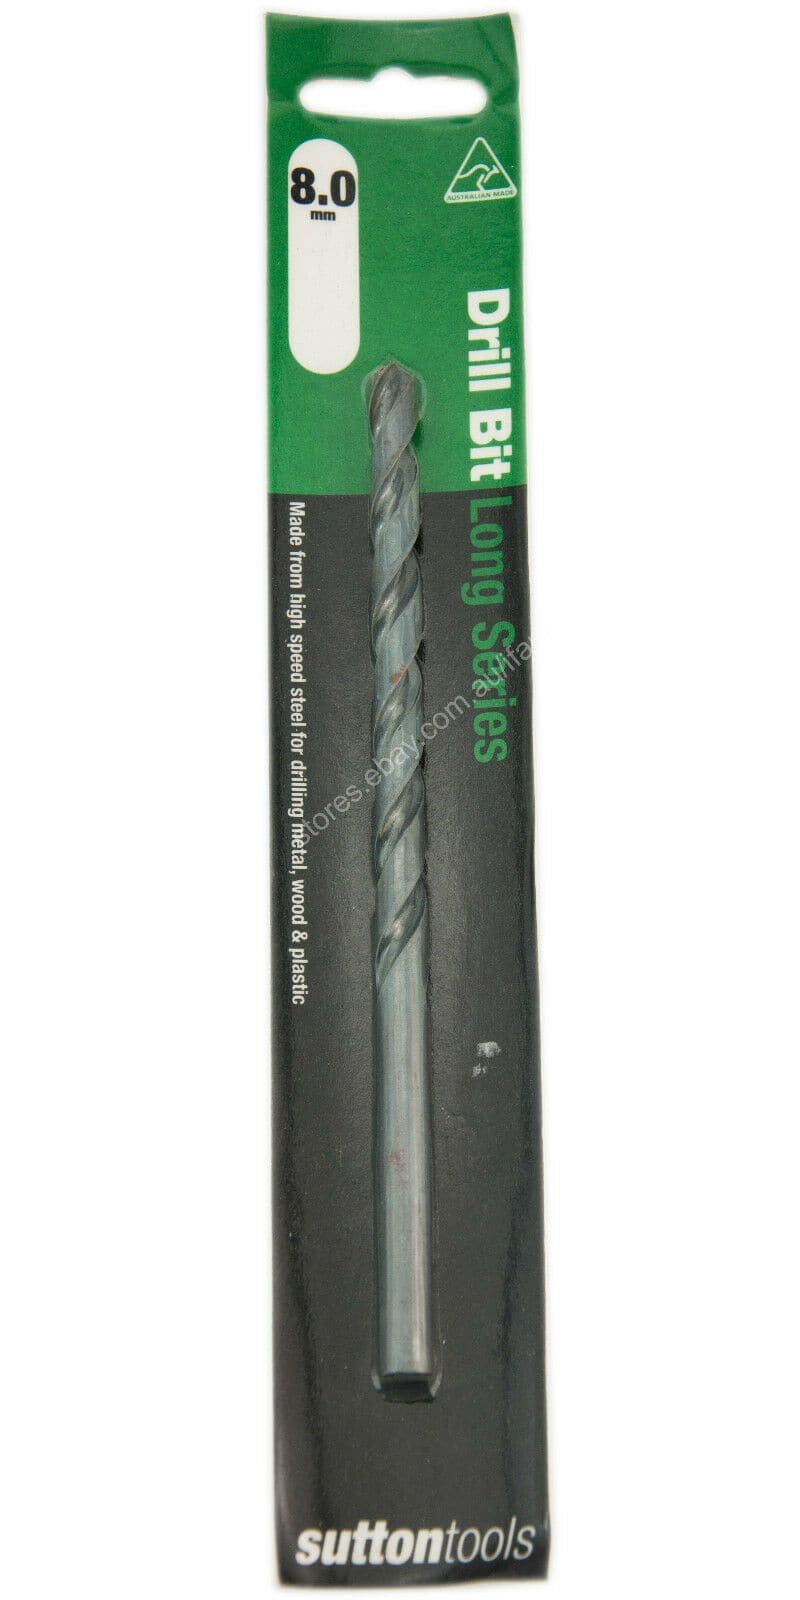 suttontools Metric HSS Long Series Drill Bits For Metal, Wood, Plastic 8mm - Double Bay Hardware